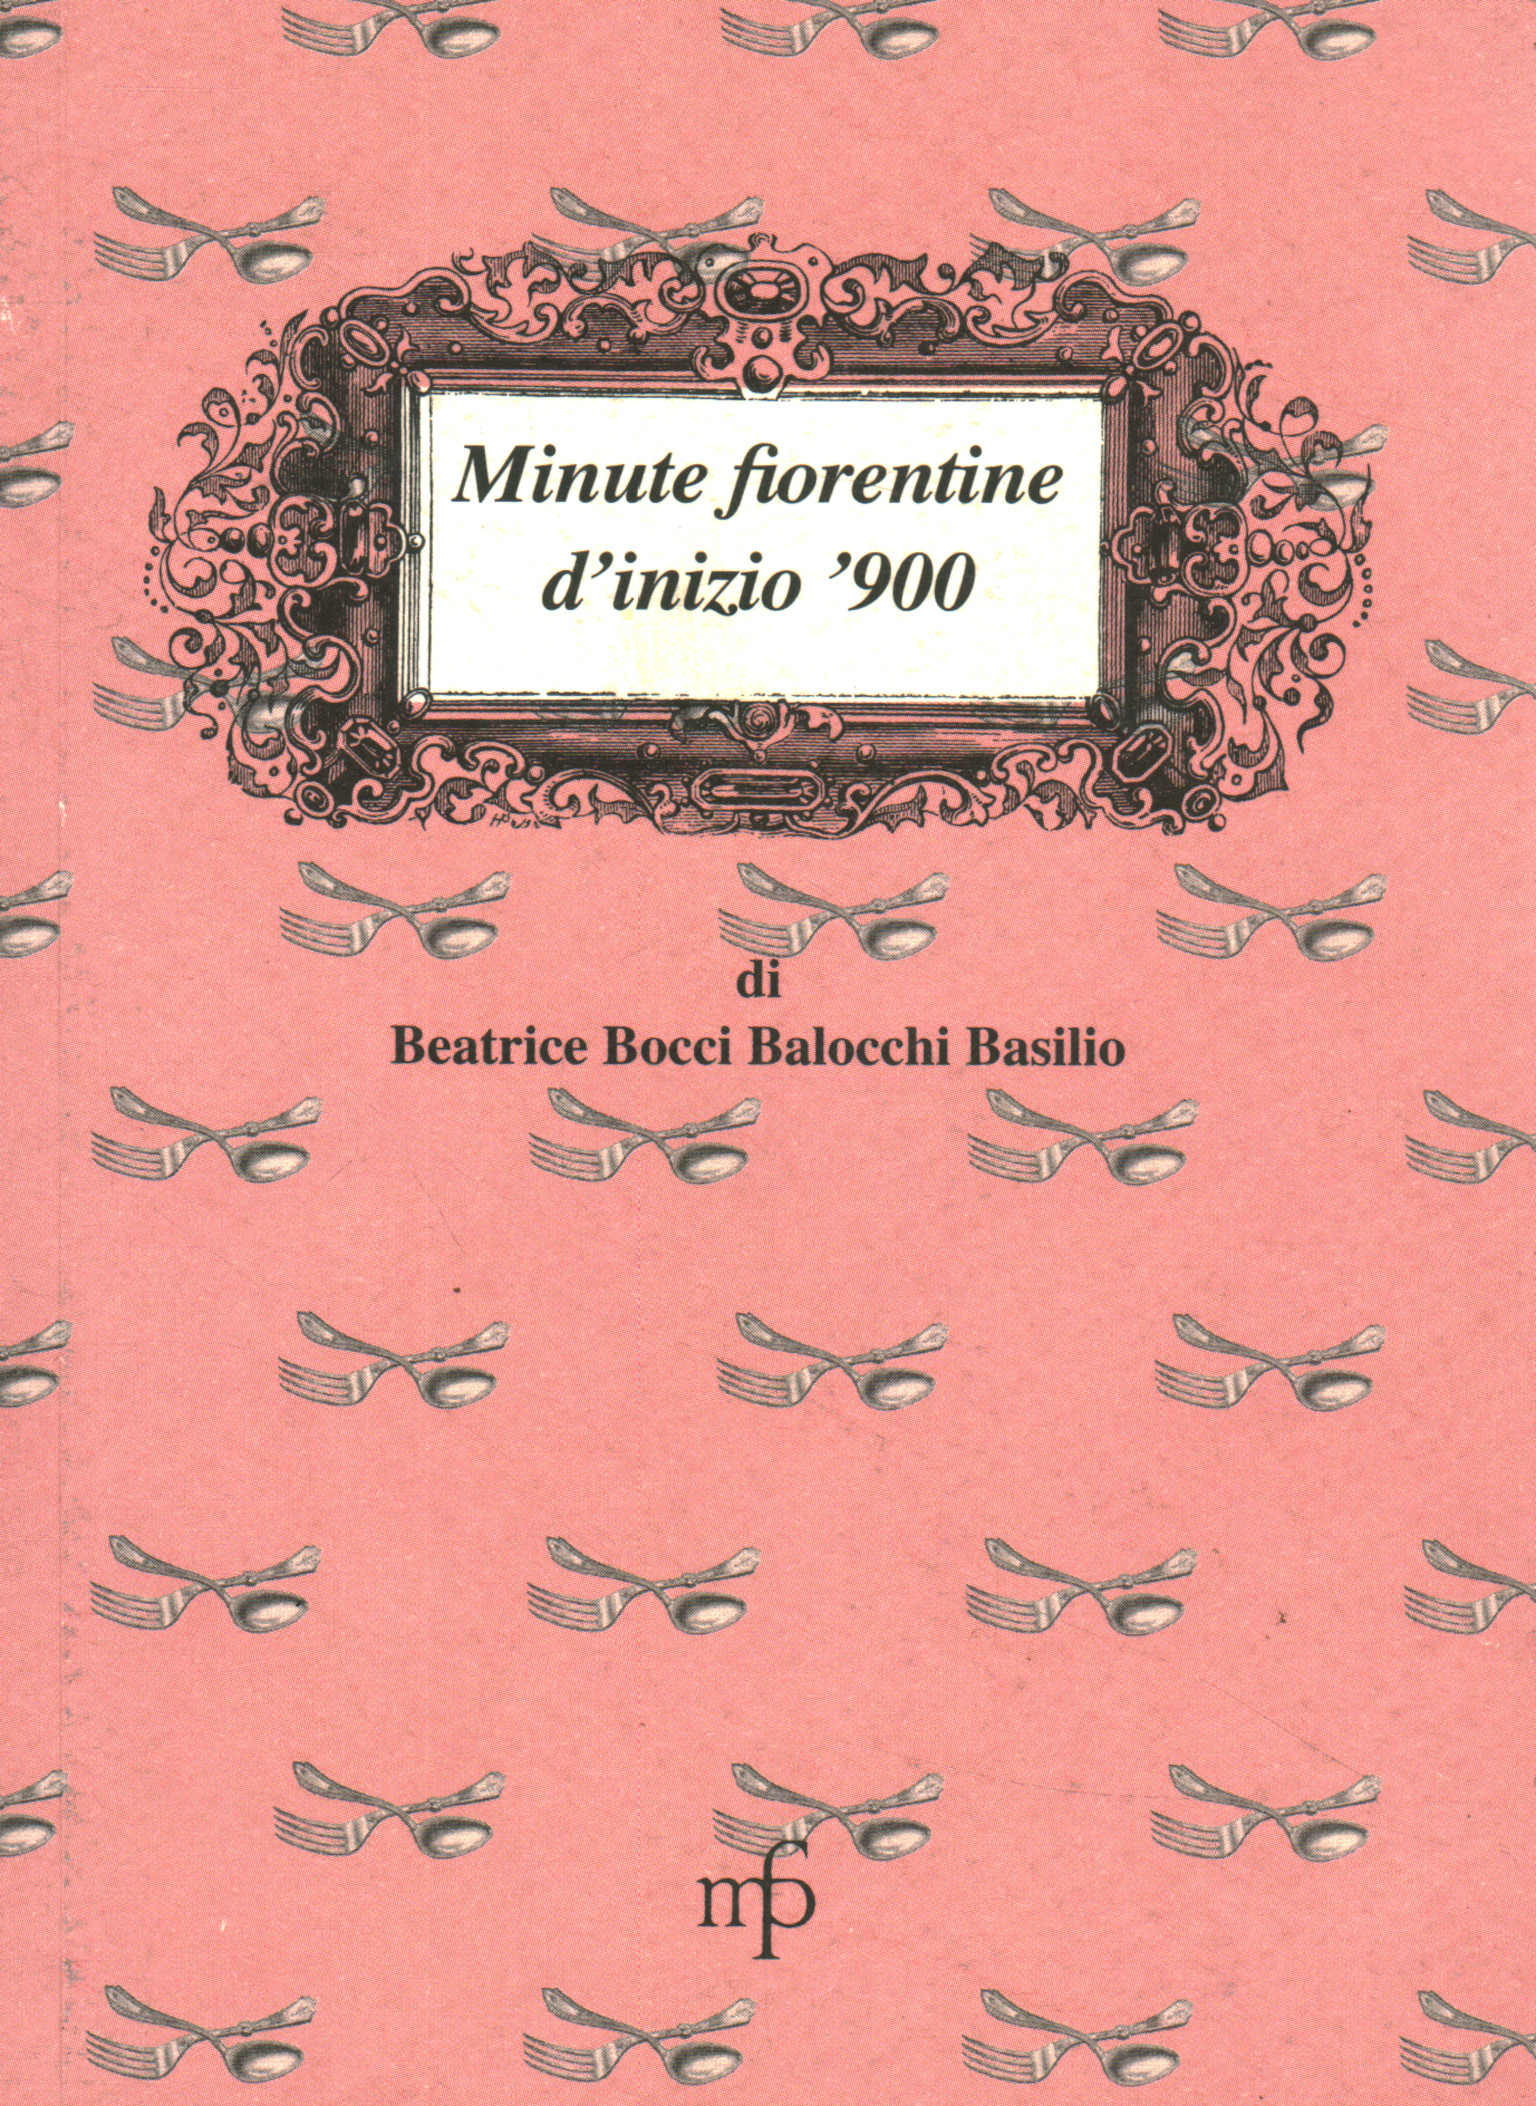 Florentine minutes from the early 1990s